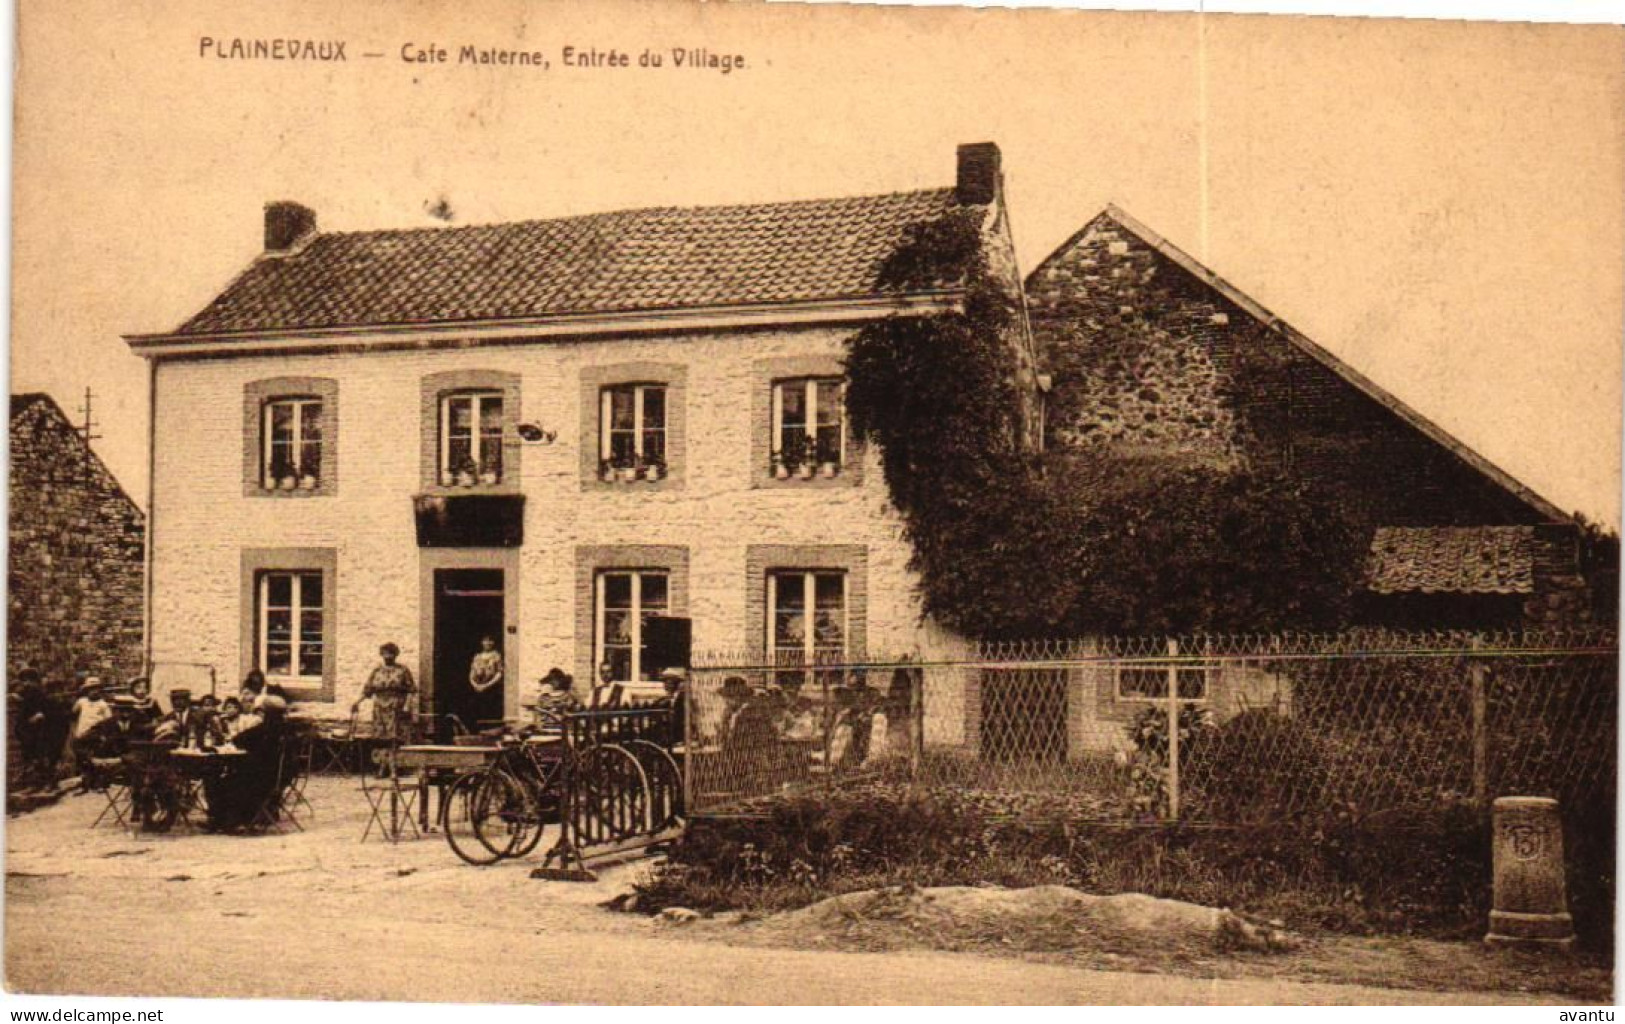 PAINEVAUX / CAFE MATERNE - Neupre